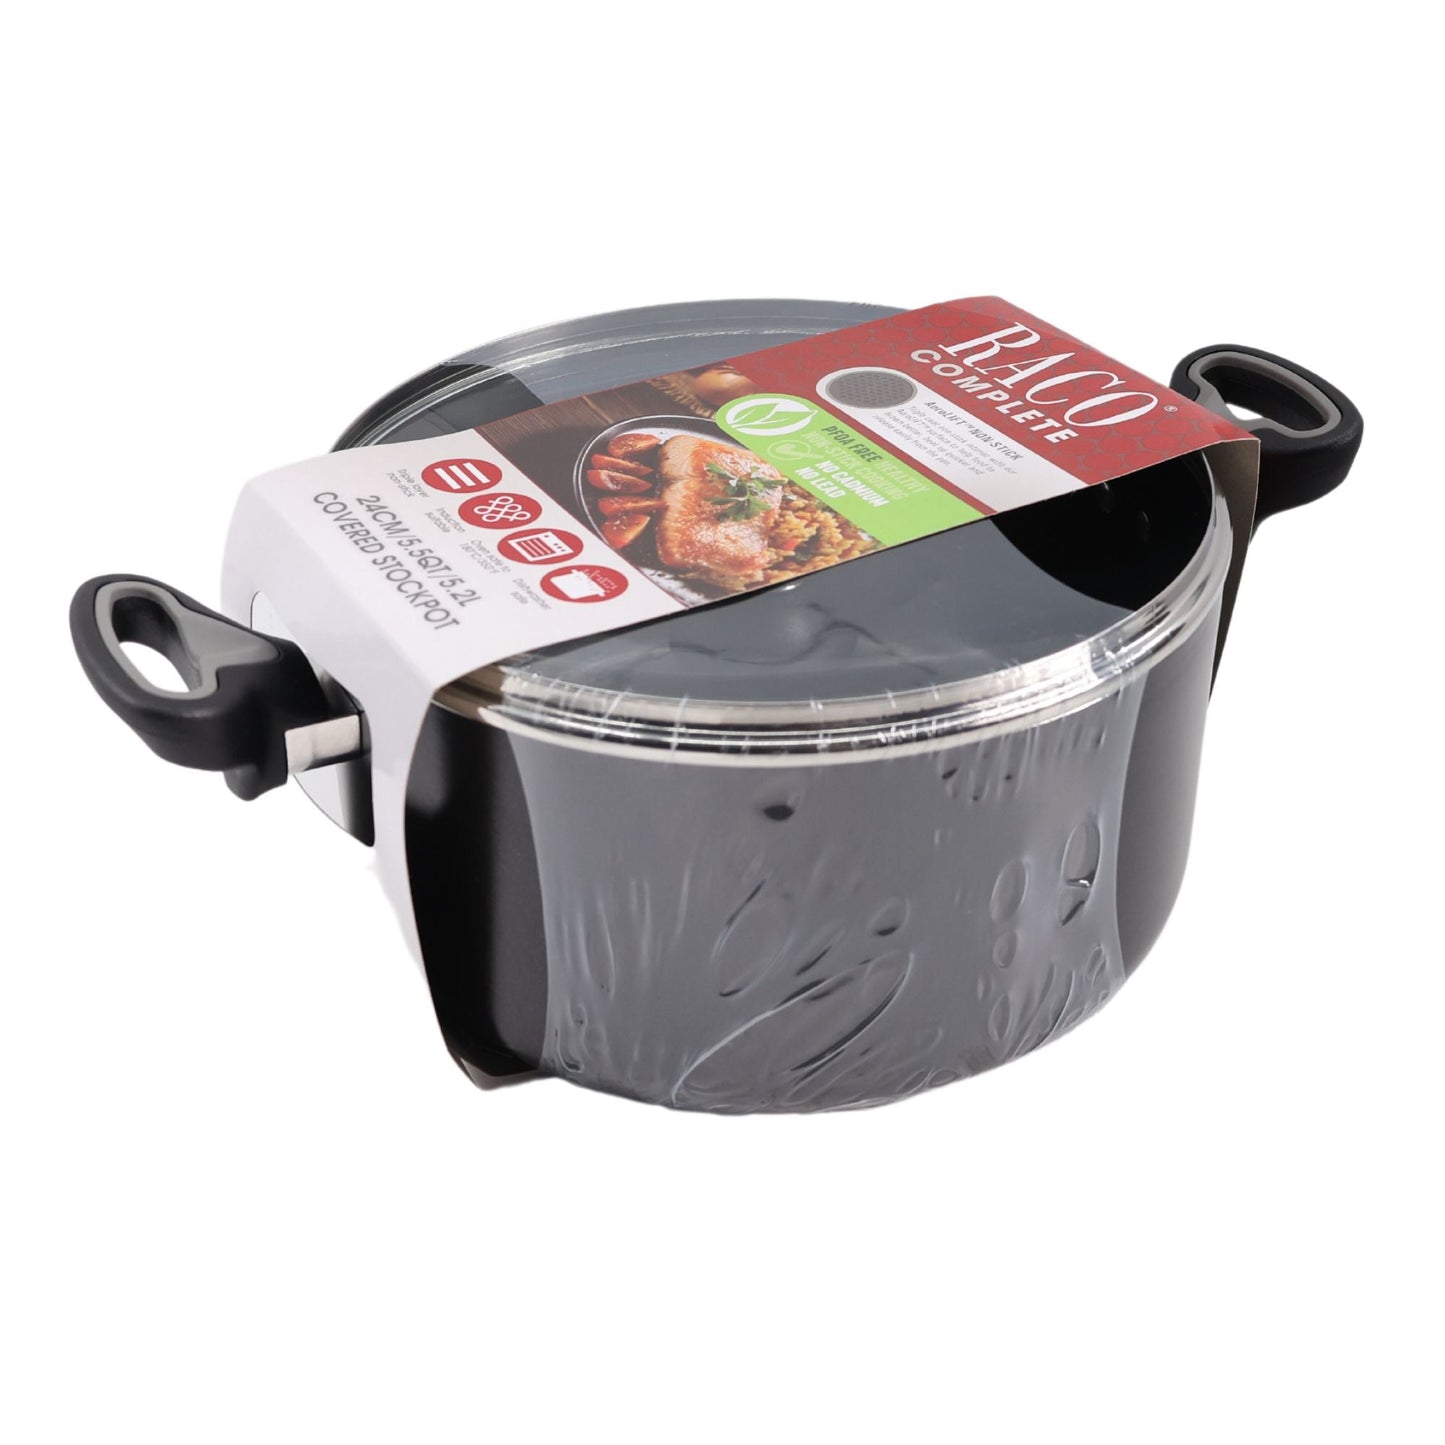 RACO Complete Nonstick Induction Covered Stockpot 24cm/5.2L